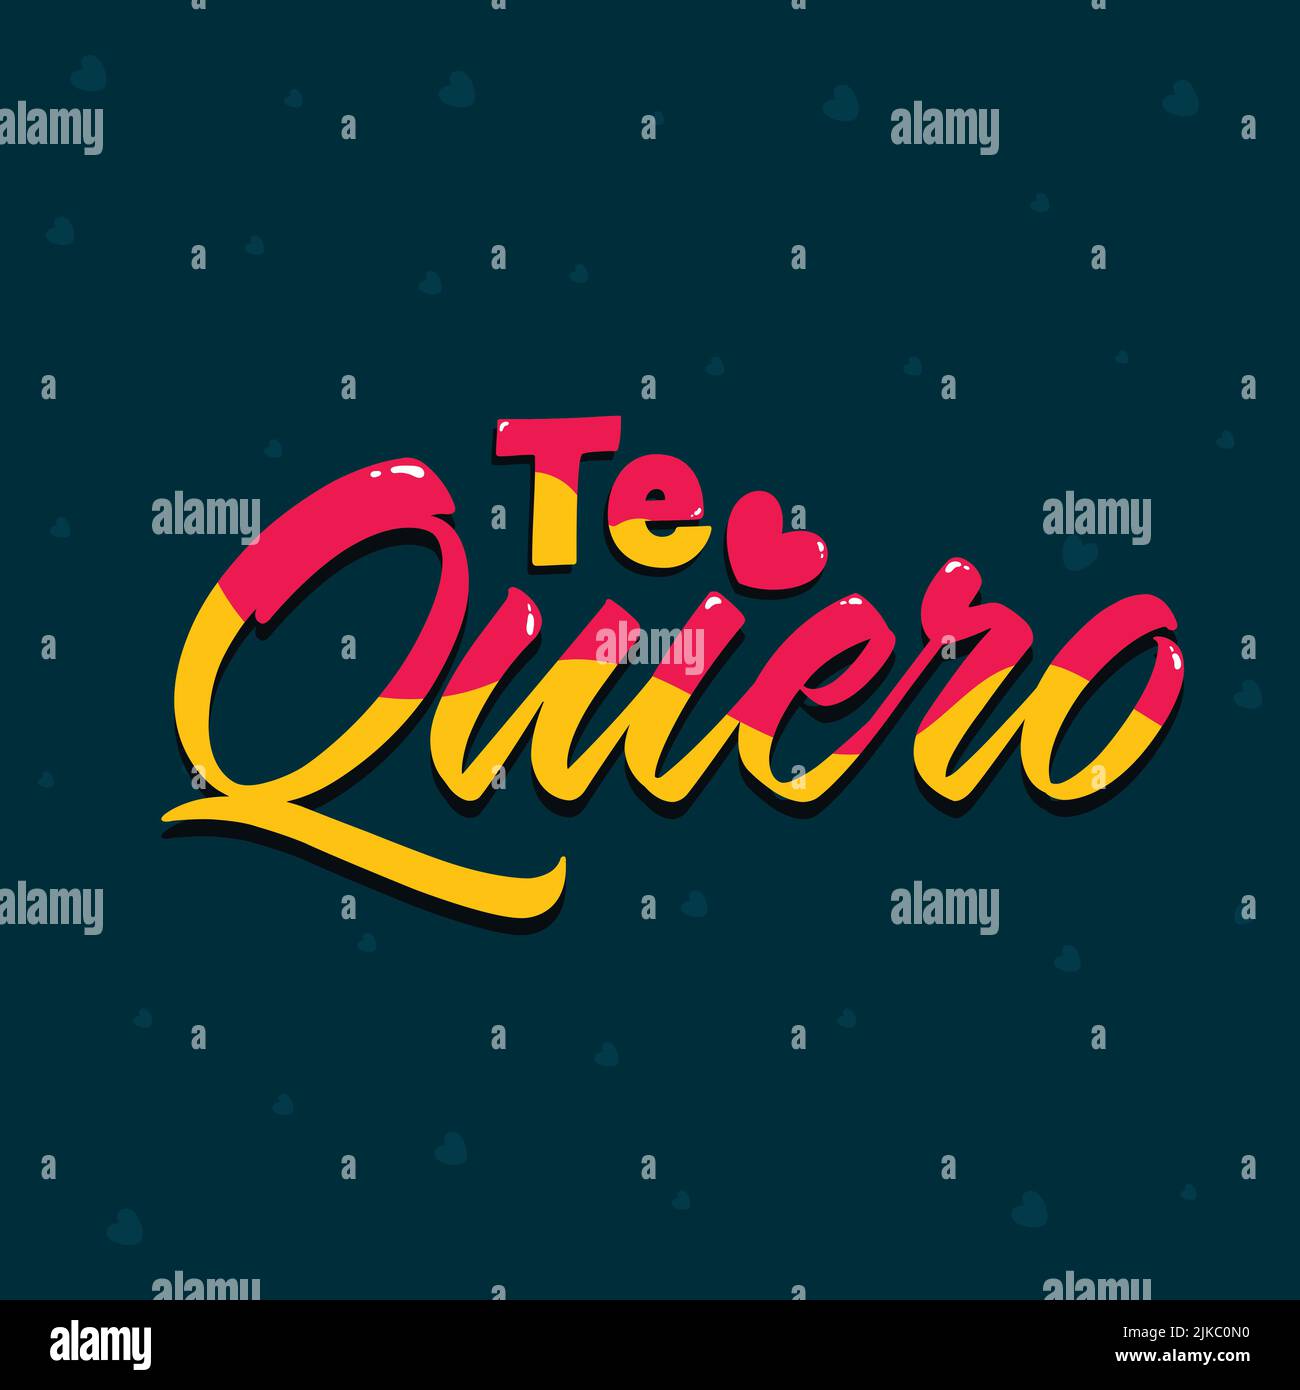 Spanish Language Of I LOVE YOU (Te Quiero) Font On Teal Hearts Background. Stock Vector